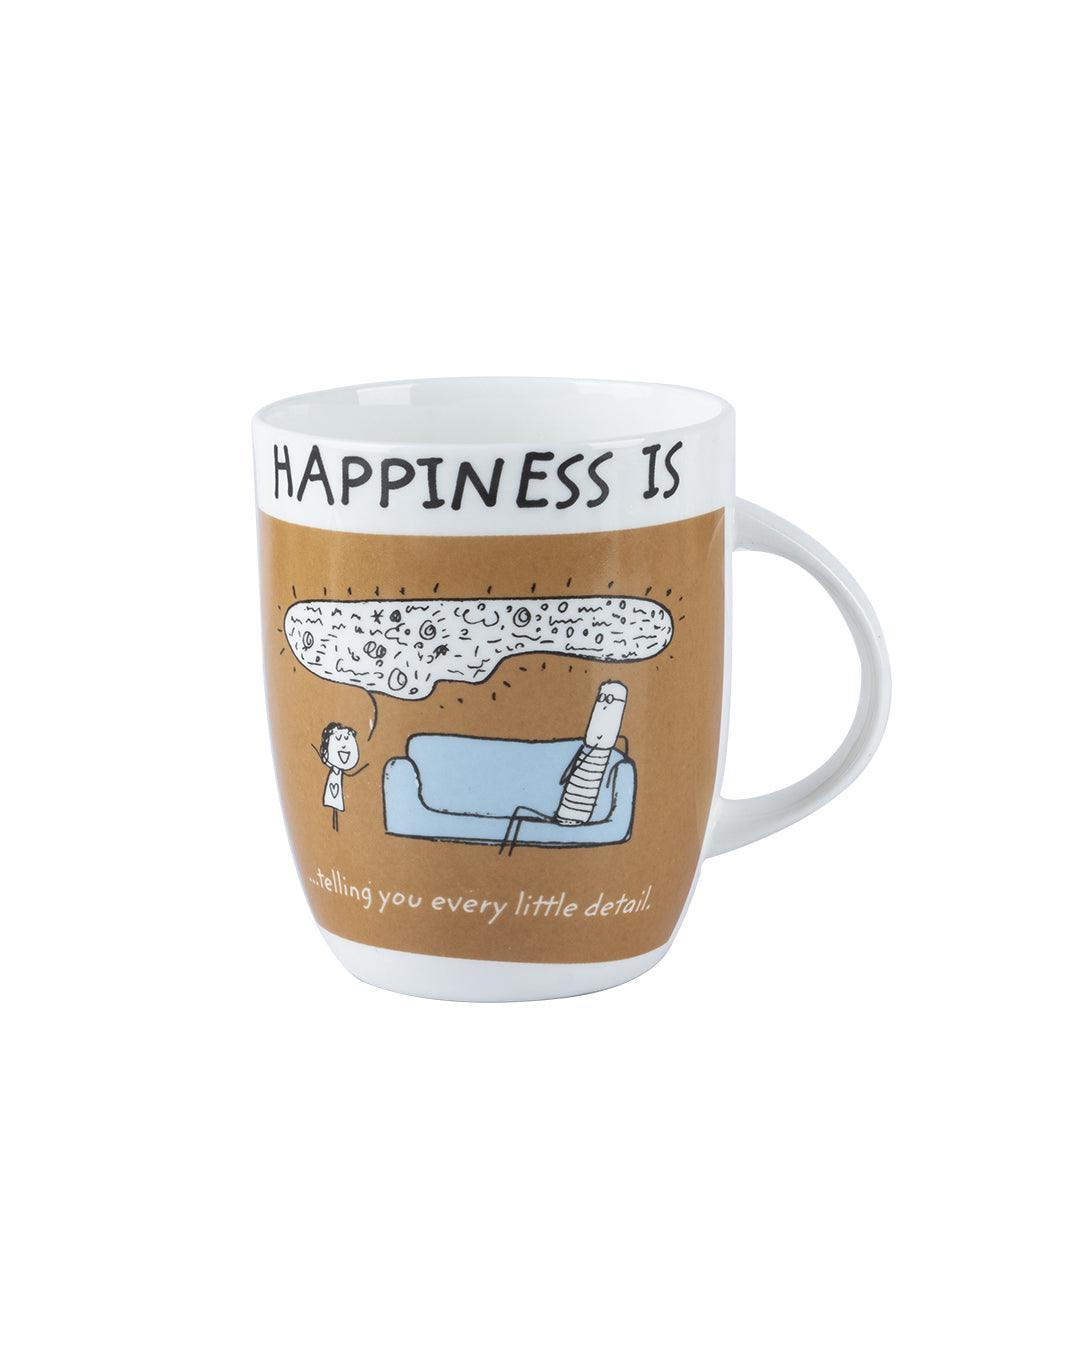 Market 99 - 'HAPPINESS IS … telling you every little detail' Graphic Print Serving Tea, Milk & Coffee Mugs In Ceramic (Set of 2, 340 mL) - MARKET 99